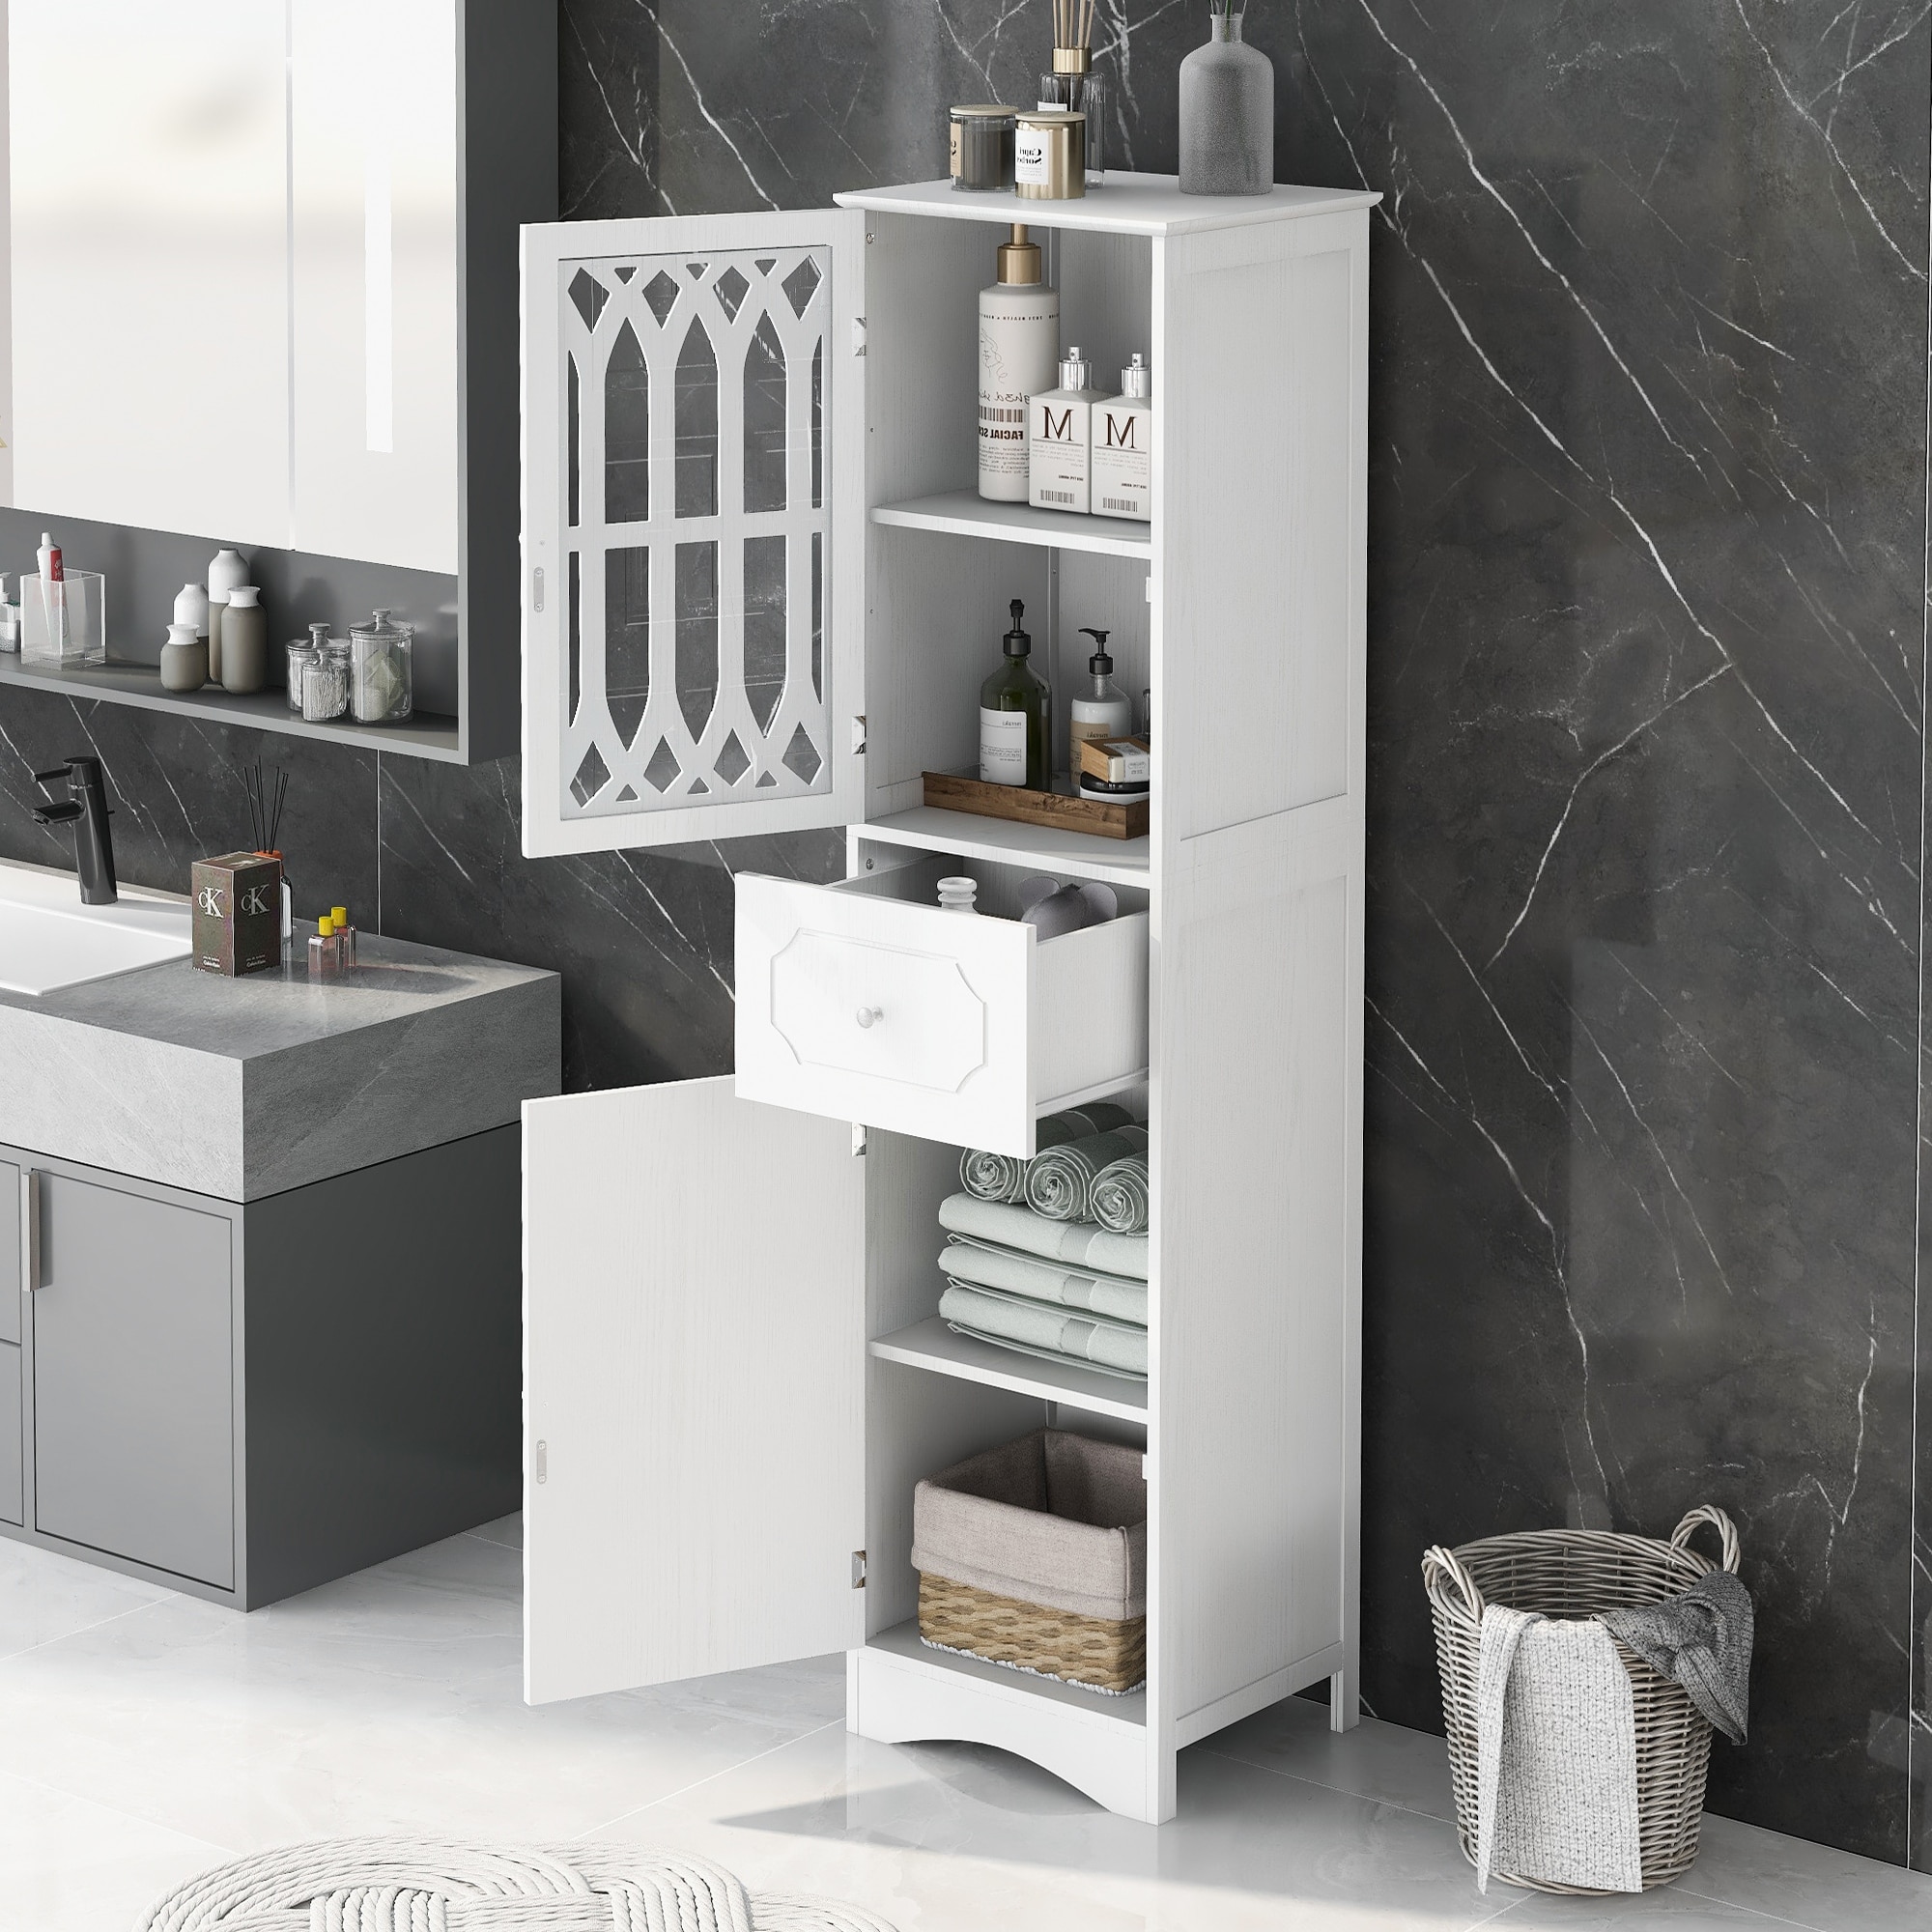 https://ak1.ostkcdn.com/images/products/is/images/direct/ad53f1e87f771f70bad48b11df5c63900b99293c/Tall-Bathroom-Cabinet%2C-Freestanding-Storage-Cabinet-with-Drawer-and-Doors%2C-MDF-Board%2C-Adjustable-Shelf.jpg